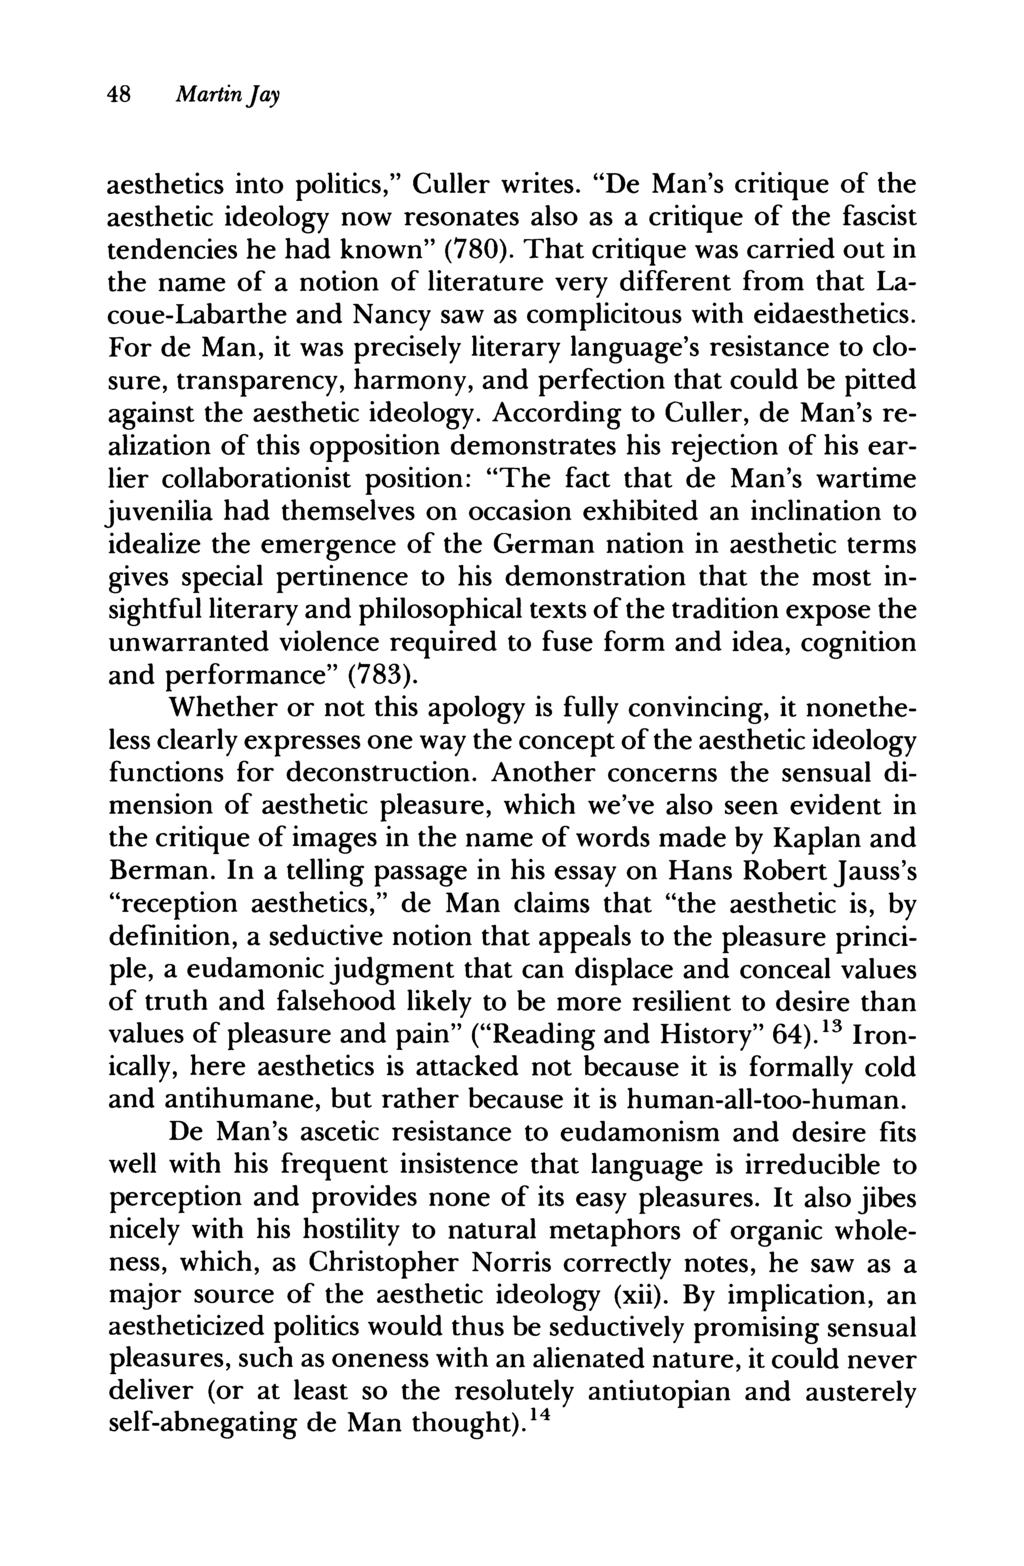 48 Martin Jay aesthetics into politics," Culler writes. "De Man's critique of the aesthetic ideology now resonates also as a critique of the fascist tendencies he had known" (780).